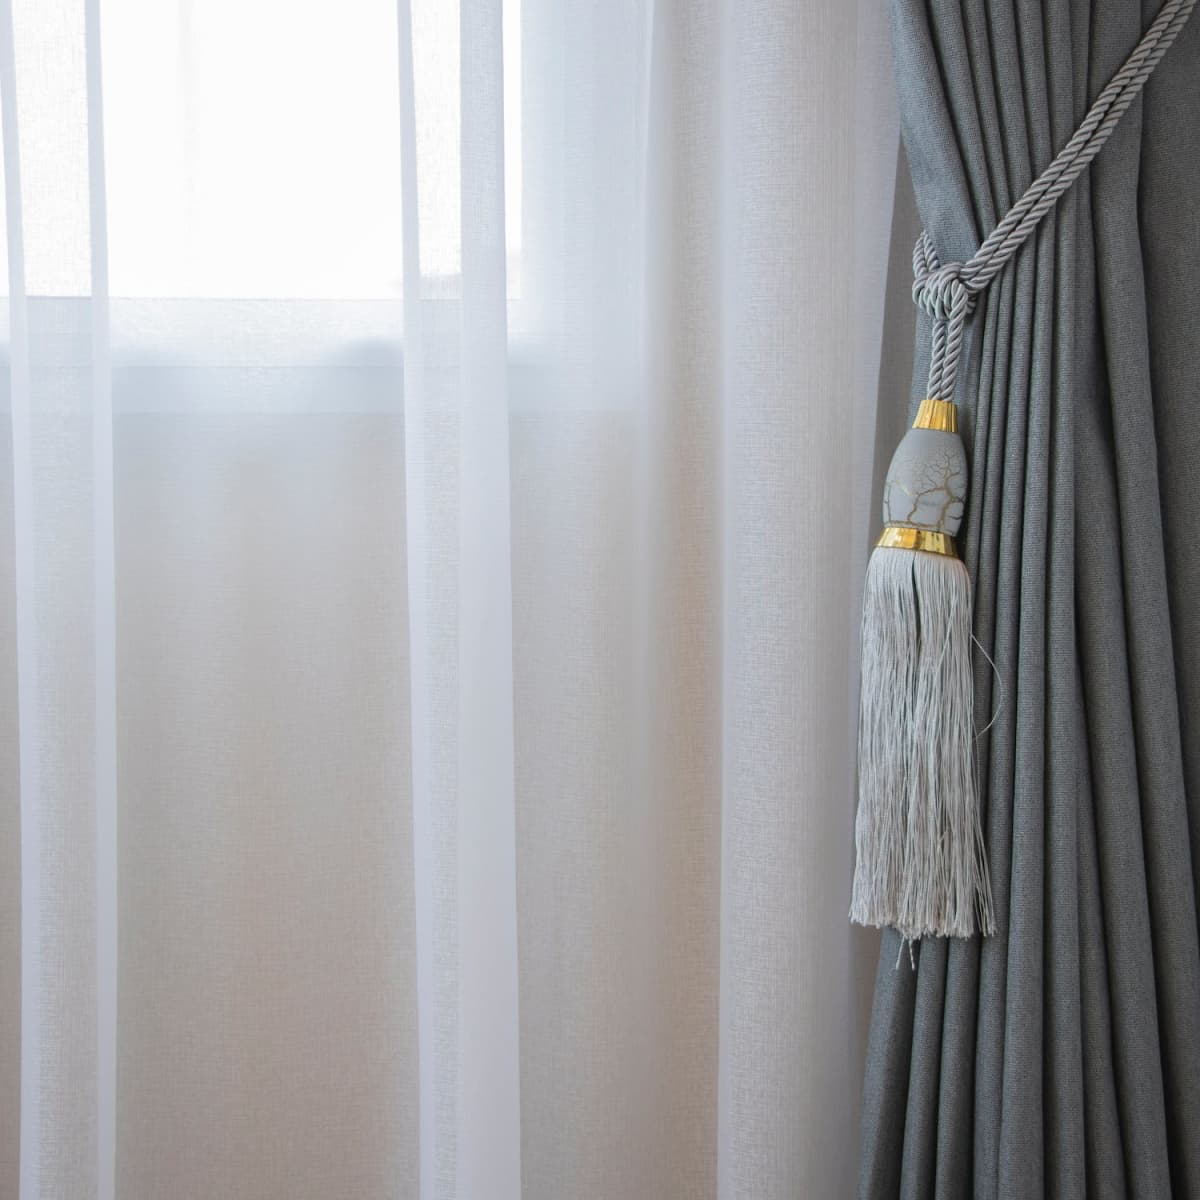 How to make curtain tie-backs